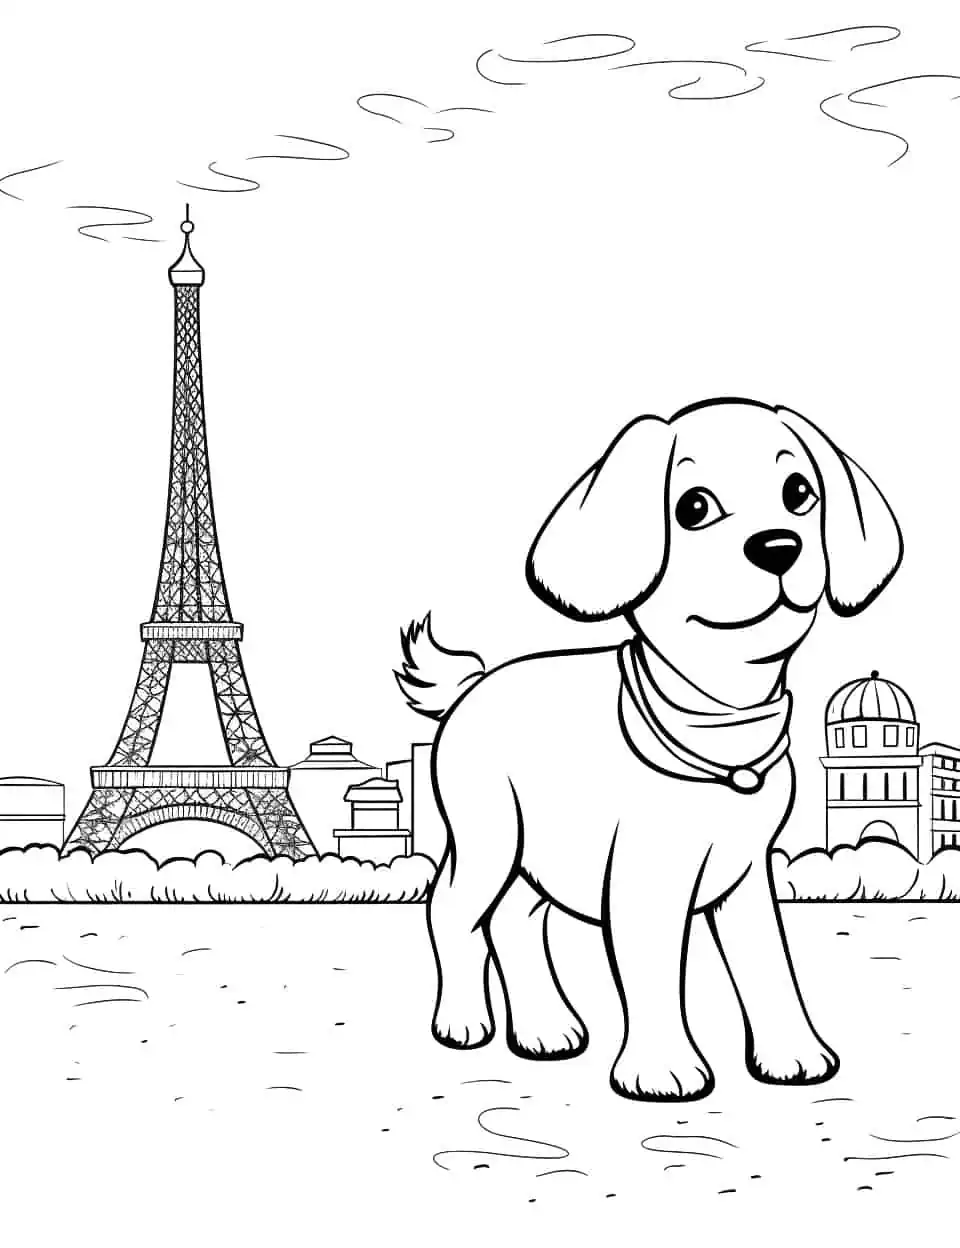 Poodle in Paris Coloring Page - A chic poodle strolling in front of the Eiffel Tower.